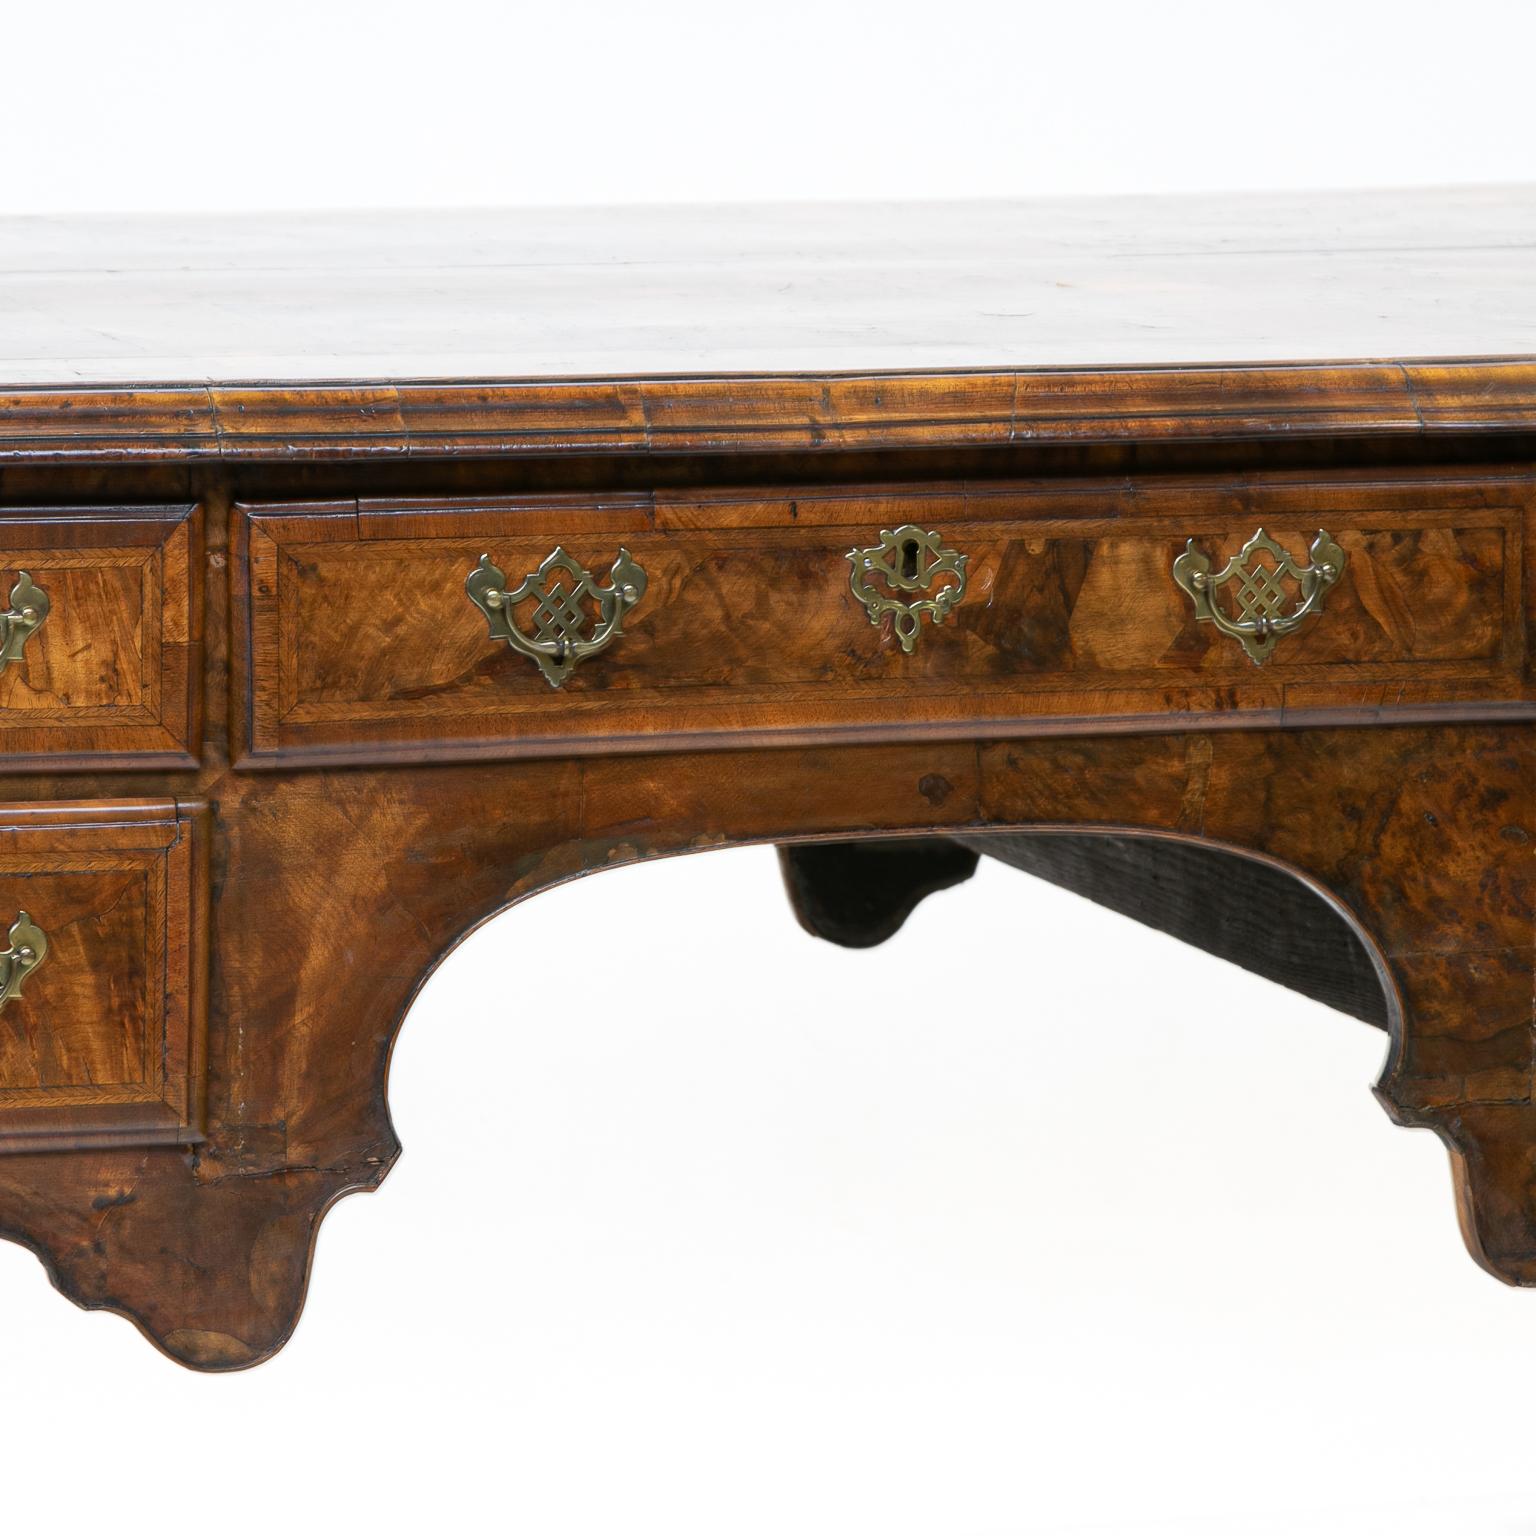 19th century Chippendale burl walnut partners writing desk
This desk has functional drawers on both sides, a true partner's desk. This desk is made of walnut and has oak-lined drawers, but is covered with a burl walnut veneer (old-style veneer)